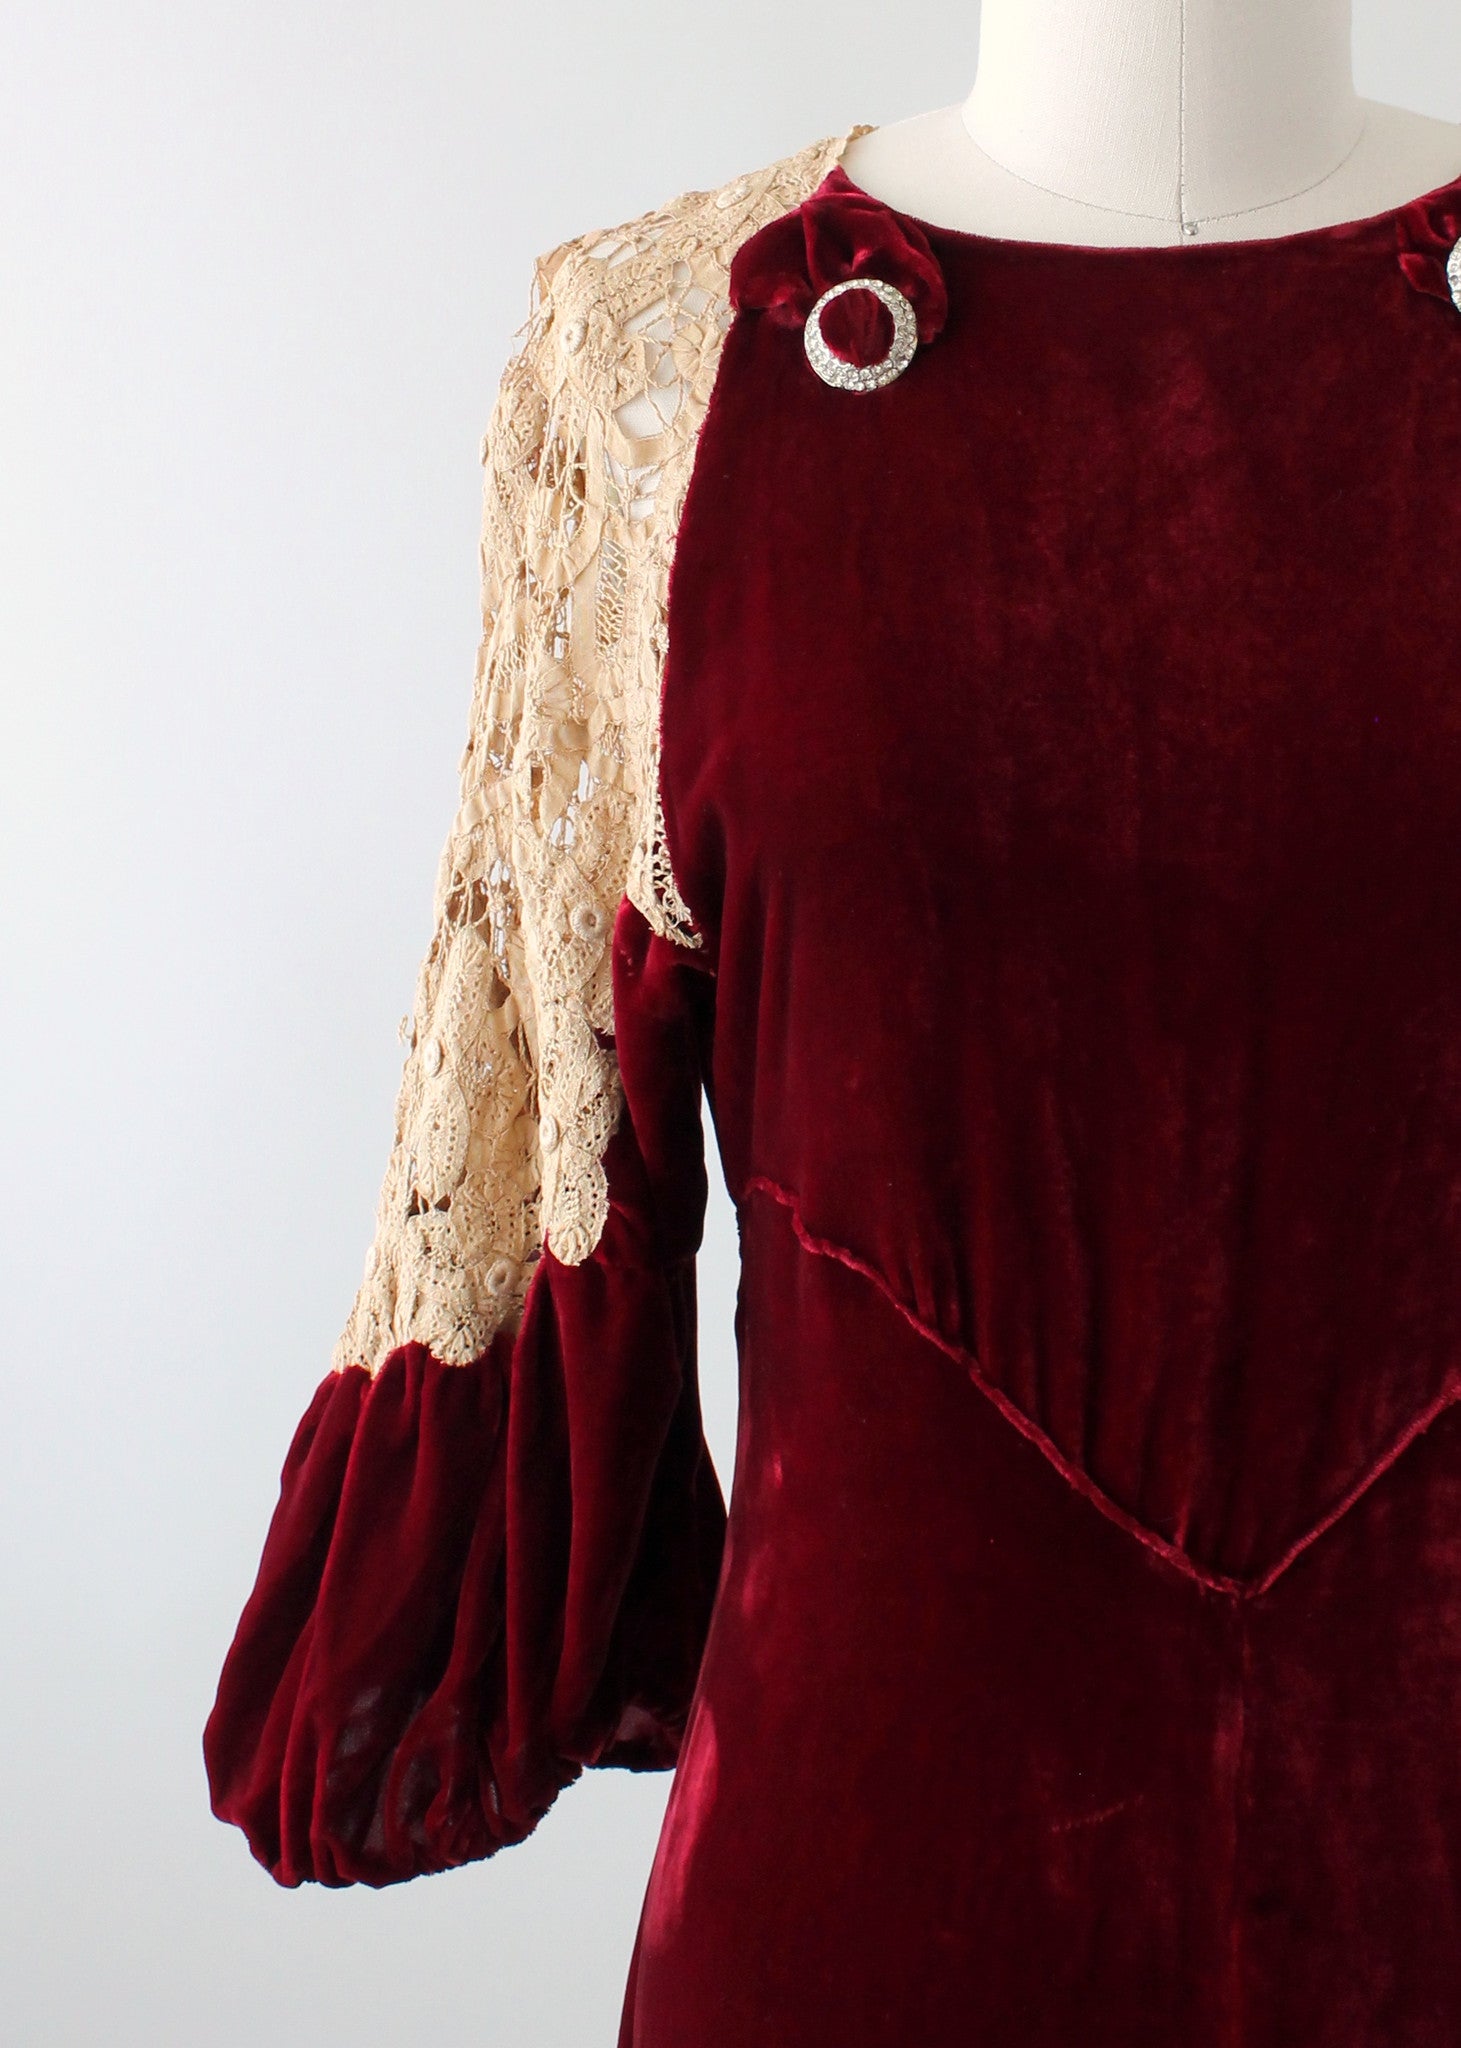 Vintage 1930s Red Velvet and Lace Evening Dress - Raleigh Vintage